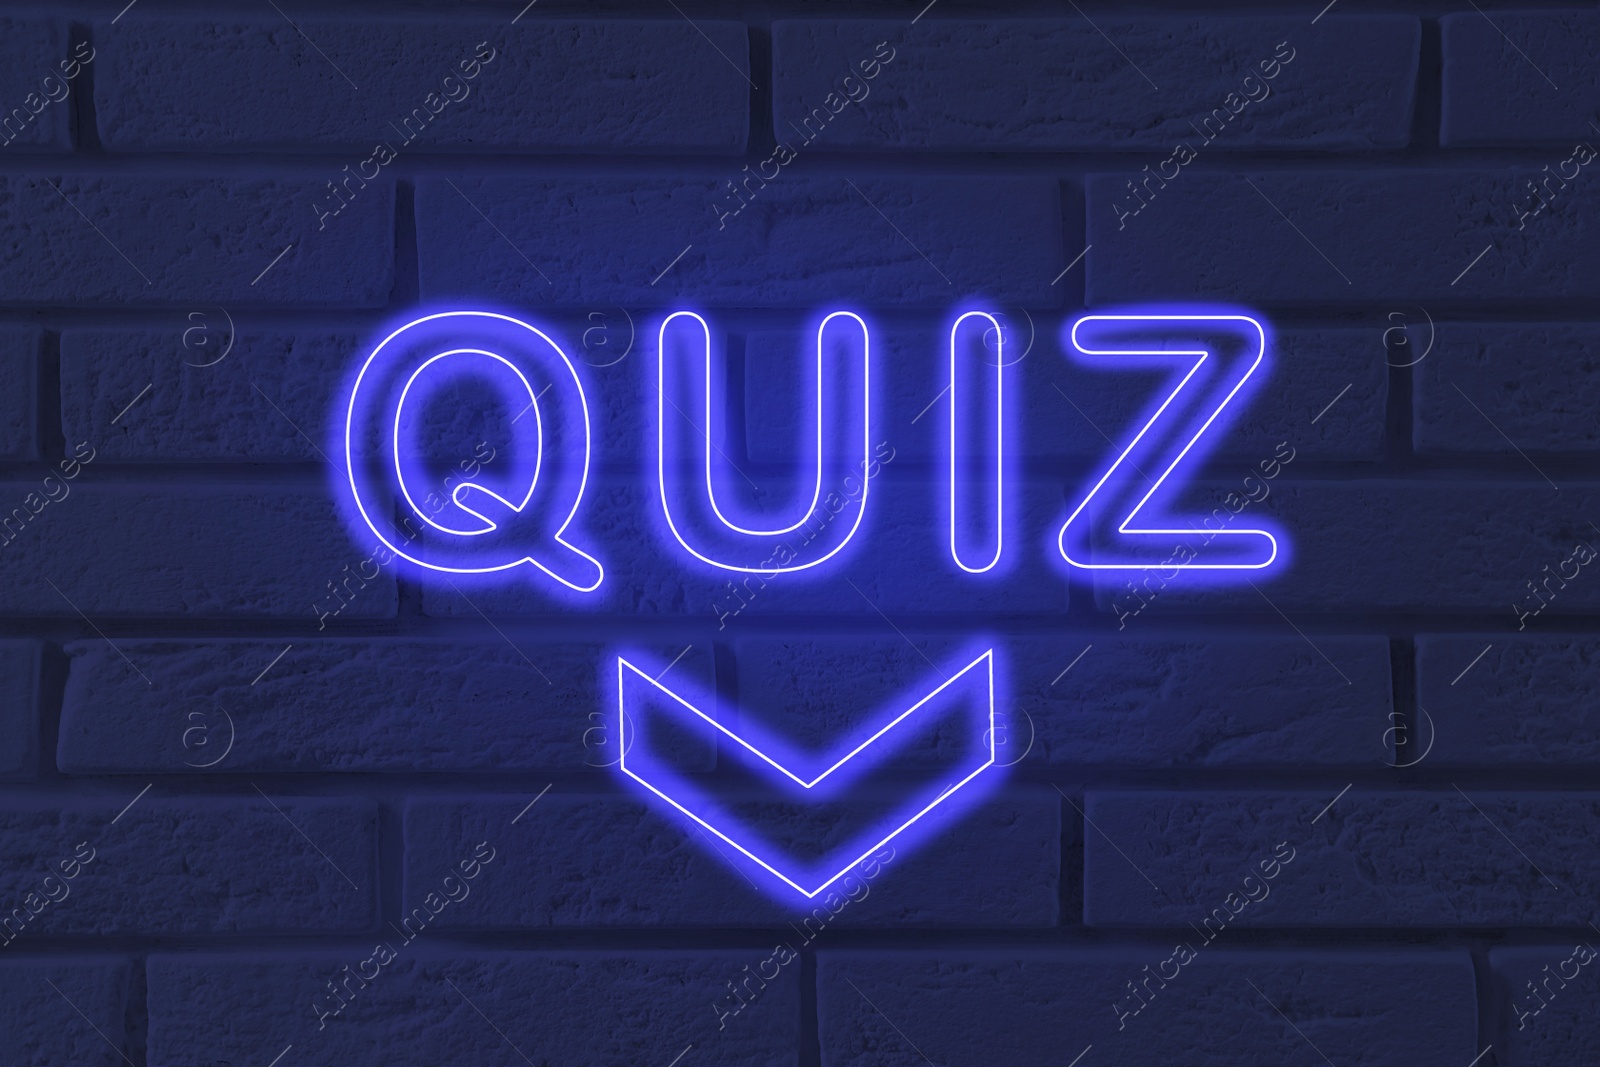 Image of Word QUIZ made of neon letters on dark brick background